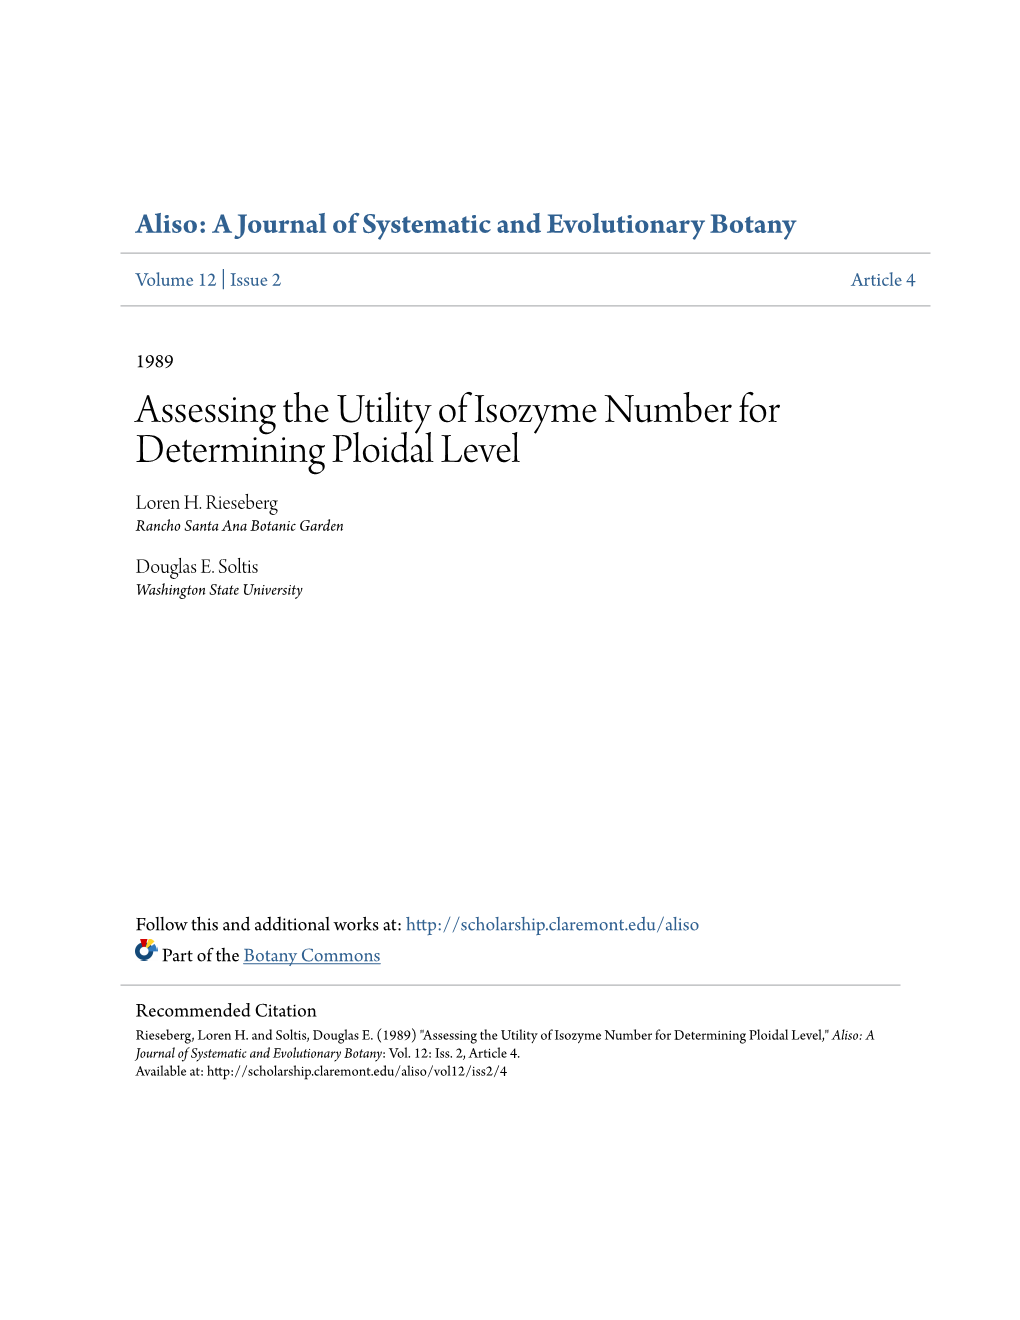 Assessing the Utility of Isozyme Number for Determining Ploidal Level Loren H